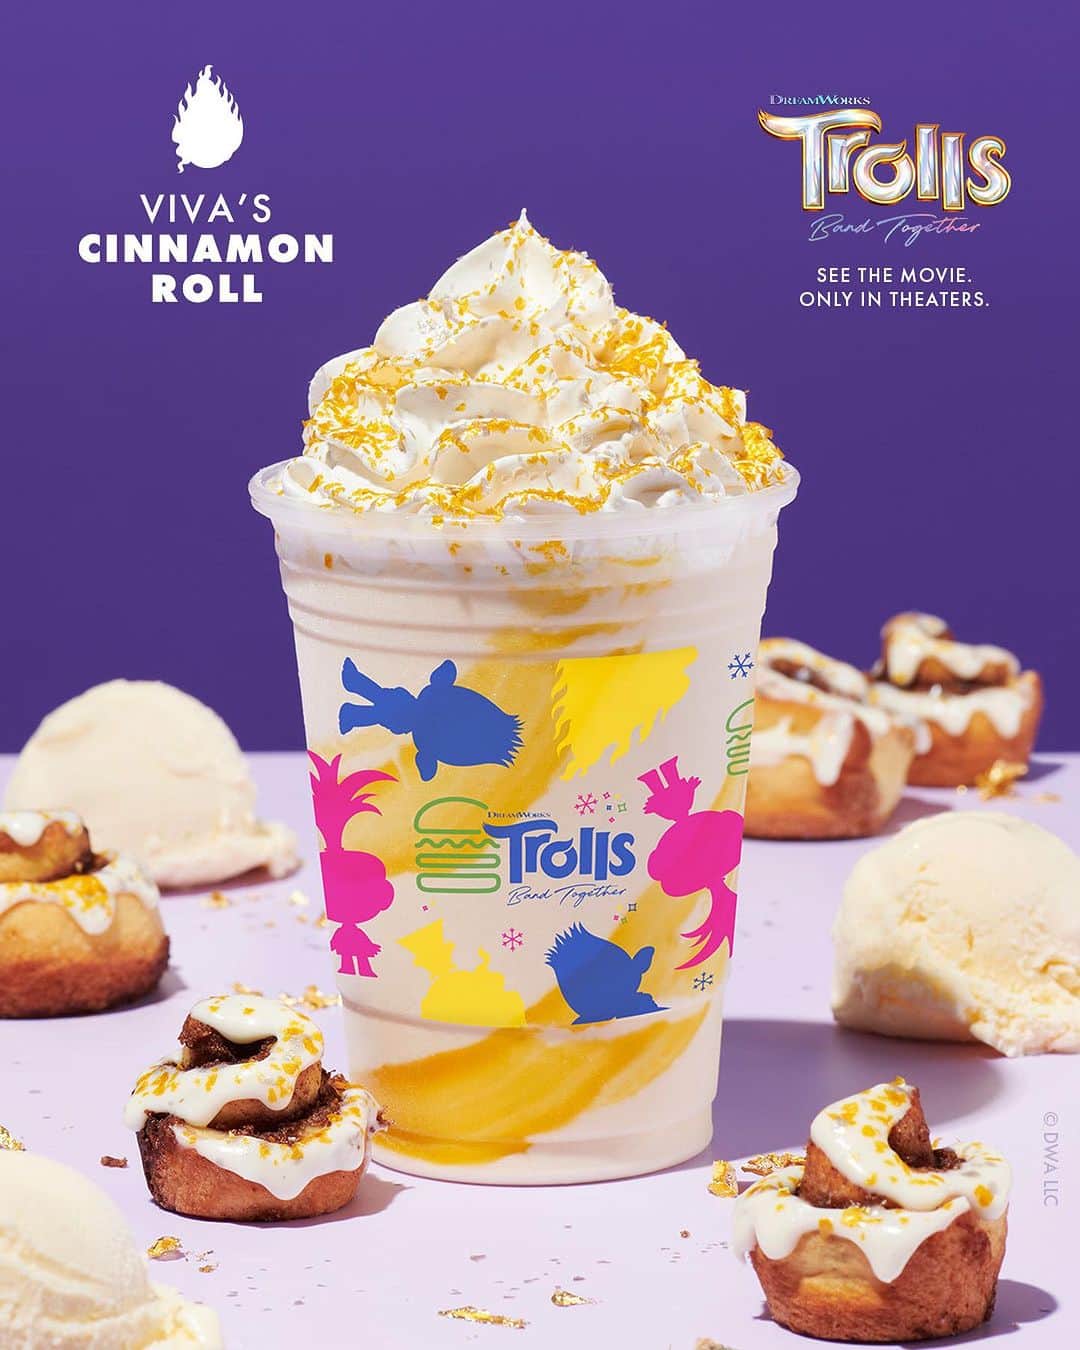 SHAKE SHACKのインスタグラム：「Ready for an adventure? We’ve got three new shakes inspired by the new DreamWorks Animation feature film, Trolls Band Together! We’re excited to introduce…    Viva’s Cinnamon Roll Shake Hand-spun cinnamon roll frozen custard, swirled with gold frosting, topped with whipped cream and gold confetti.     Branch’s Chocolate Peppermint Shake  Hand-spun vanilla and chocolate frozen custard, mixed with mint fudge, topped with whipped cream and mint candy crunch.   Poppy’s Sugar Cookie Shake Hand-spun sugar cookie frozen custard, mixed with cookie dough pop candy, topped with whipped cream and cotton candy.    See #TrollsBandTogether only in theaters November 17!」